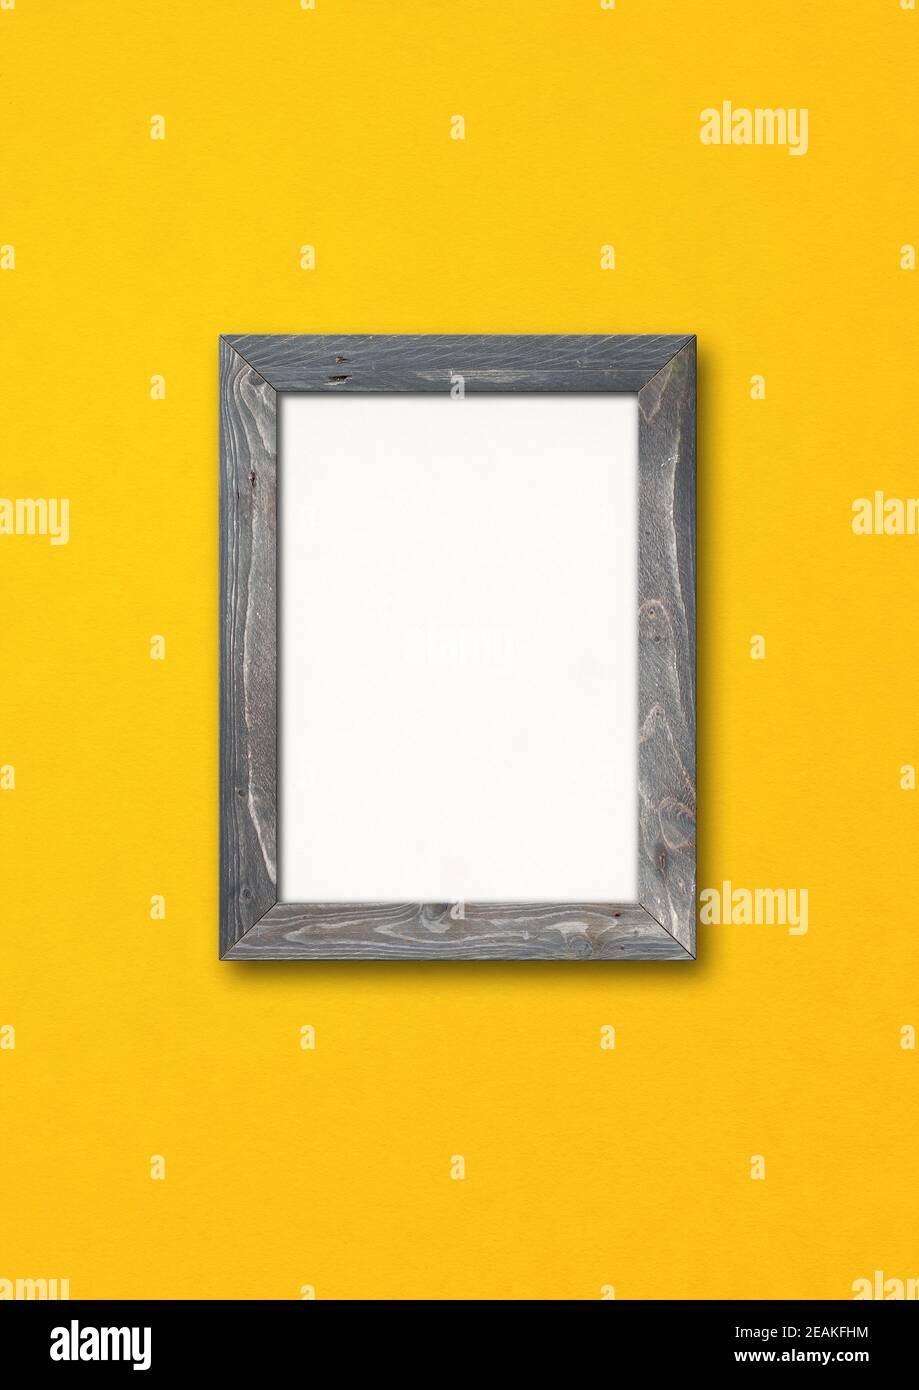 Old rustic wooden picture frame hanging on a yellow wall Stock Photo